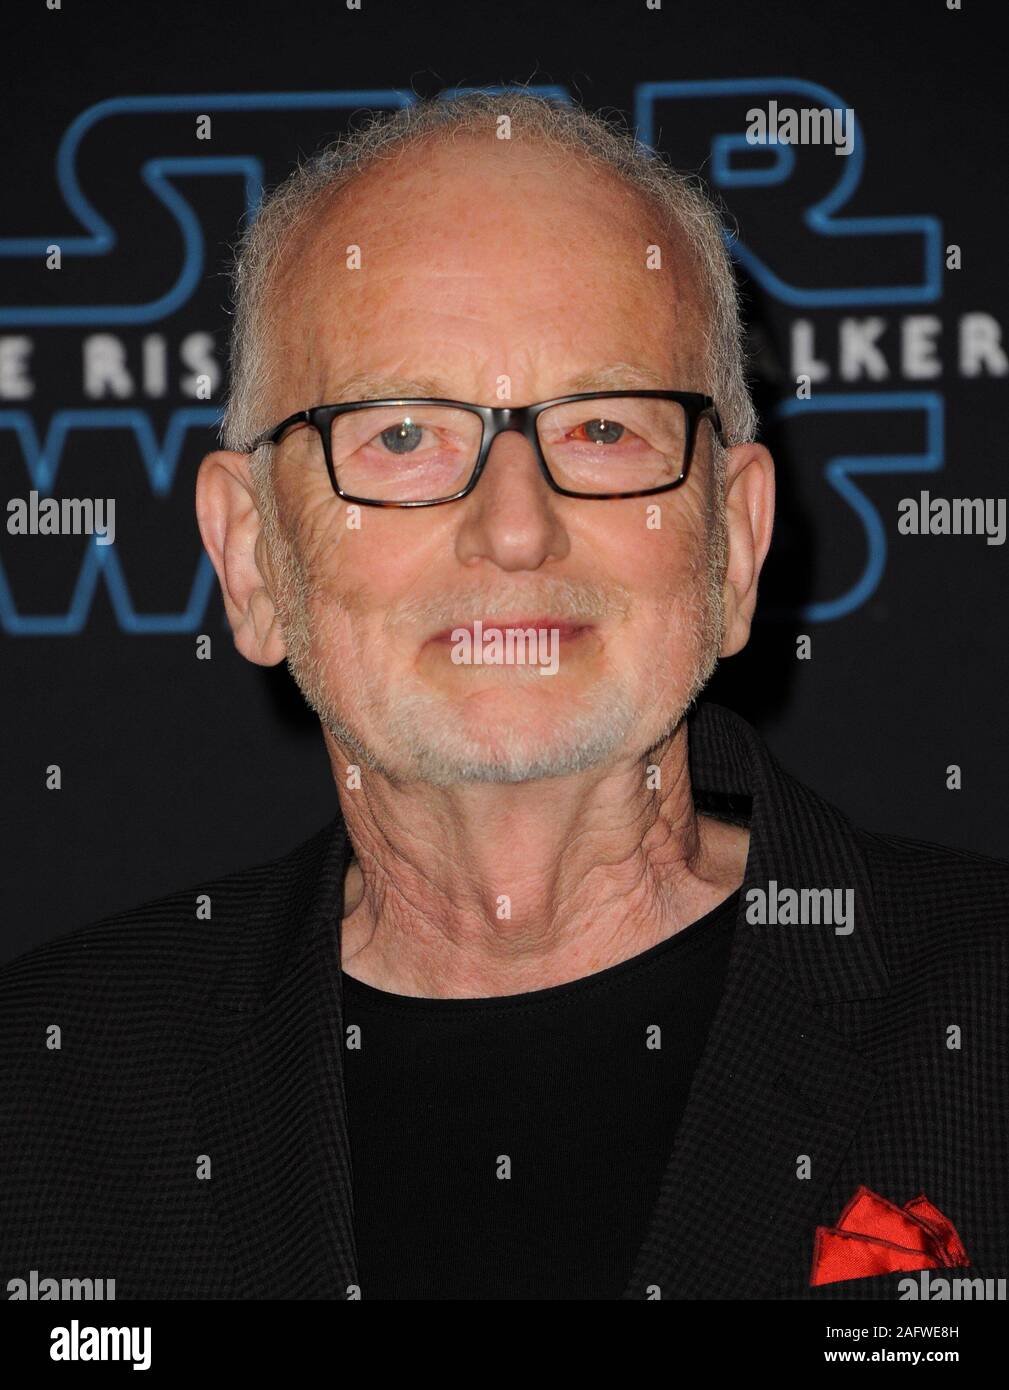 Los Angeles, CA. 16th Dec, 2019. Ian McDiarmid at arrivals for STAR WARS: THE RISE OF SKYWALKER Premiere, El Capitan Theatre, Los Angeles, CA December 16, 2019. Credit: Elizabeth Goodenough/Everett Collection/Alamy Live News Stock Photo